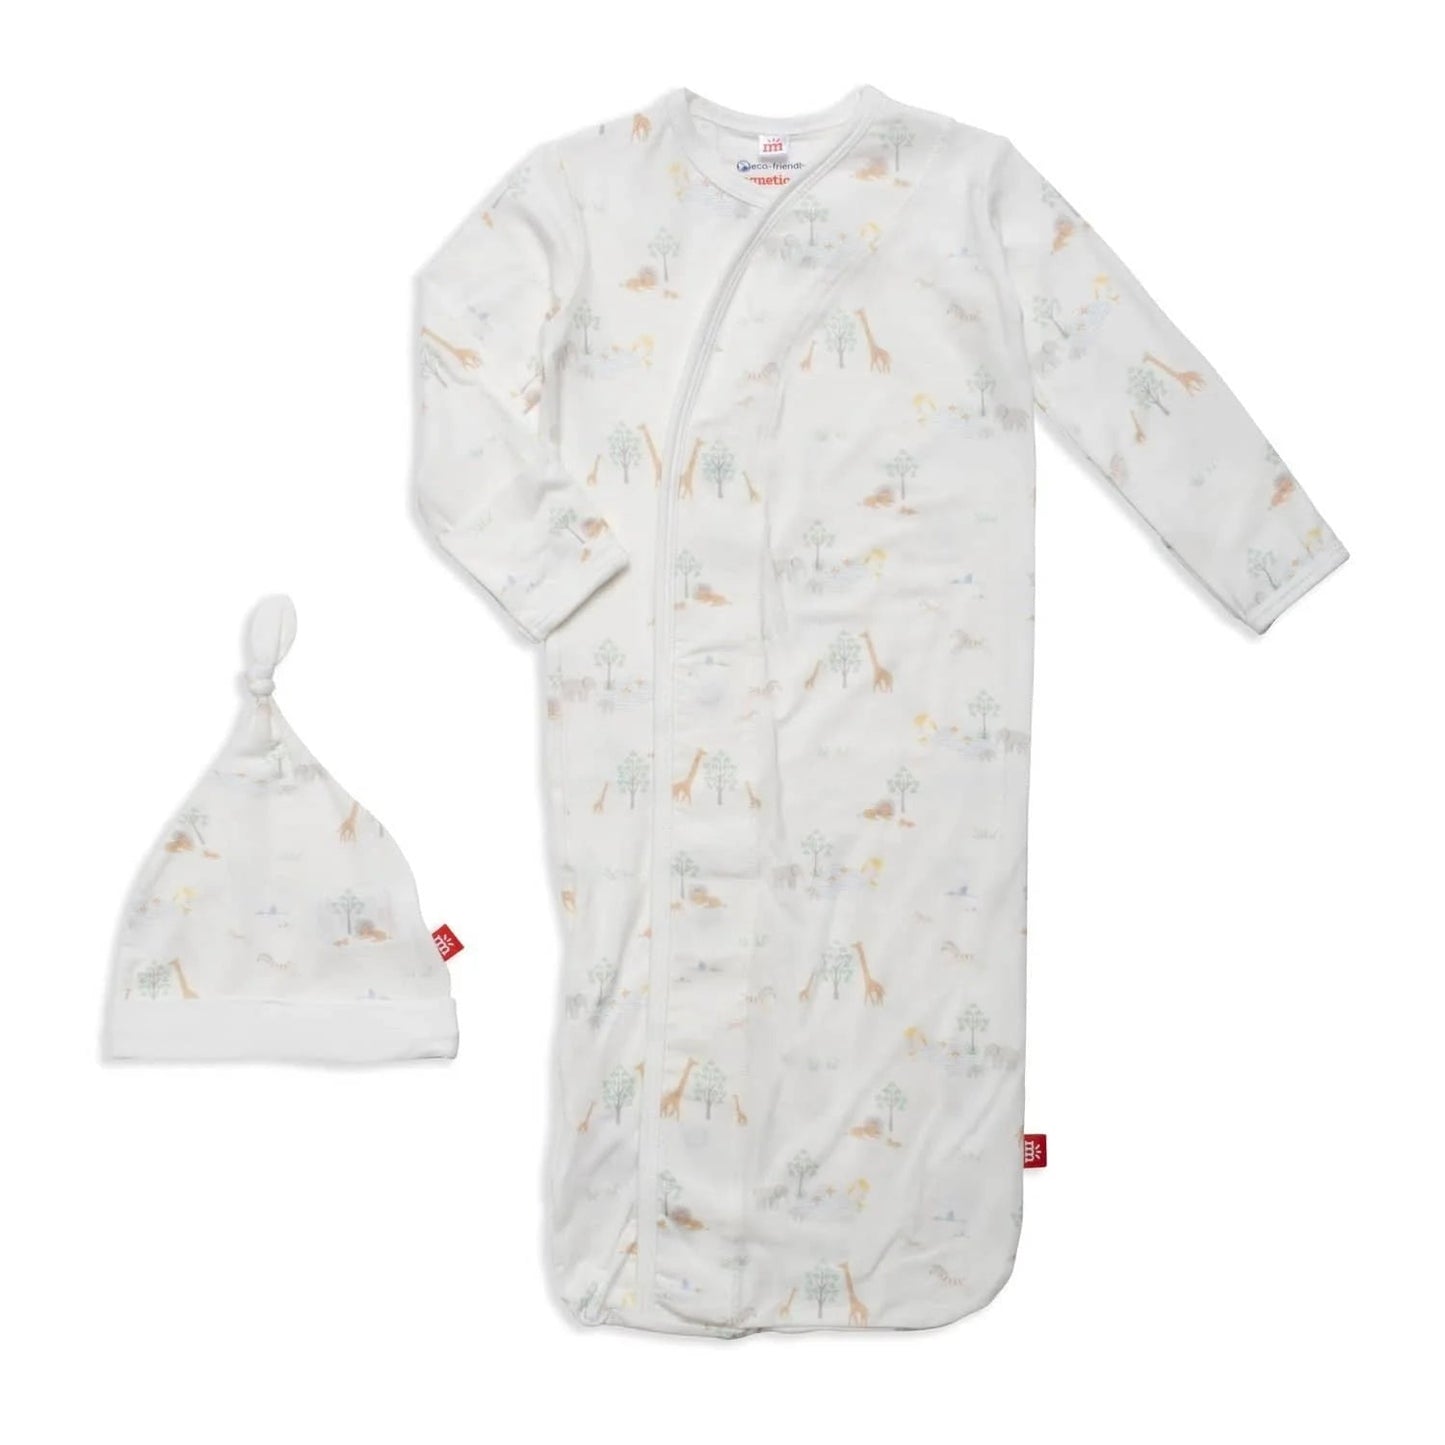 White Serene Safari Gown and Hat Set 130 BABY BOYS/NEUTRAL APPAREL Magnetic Me NB-3m 